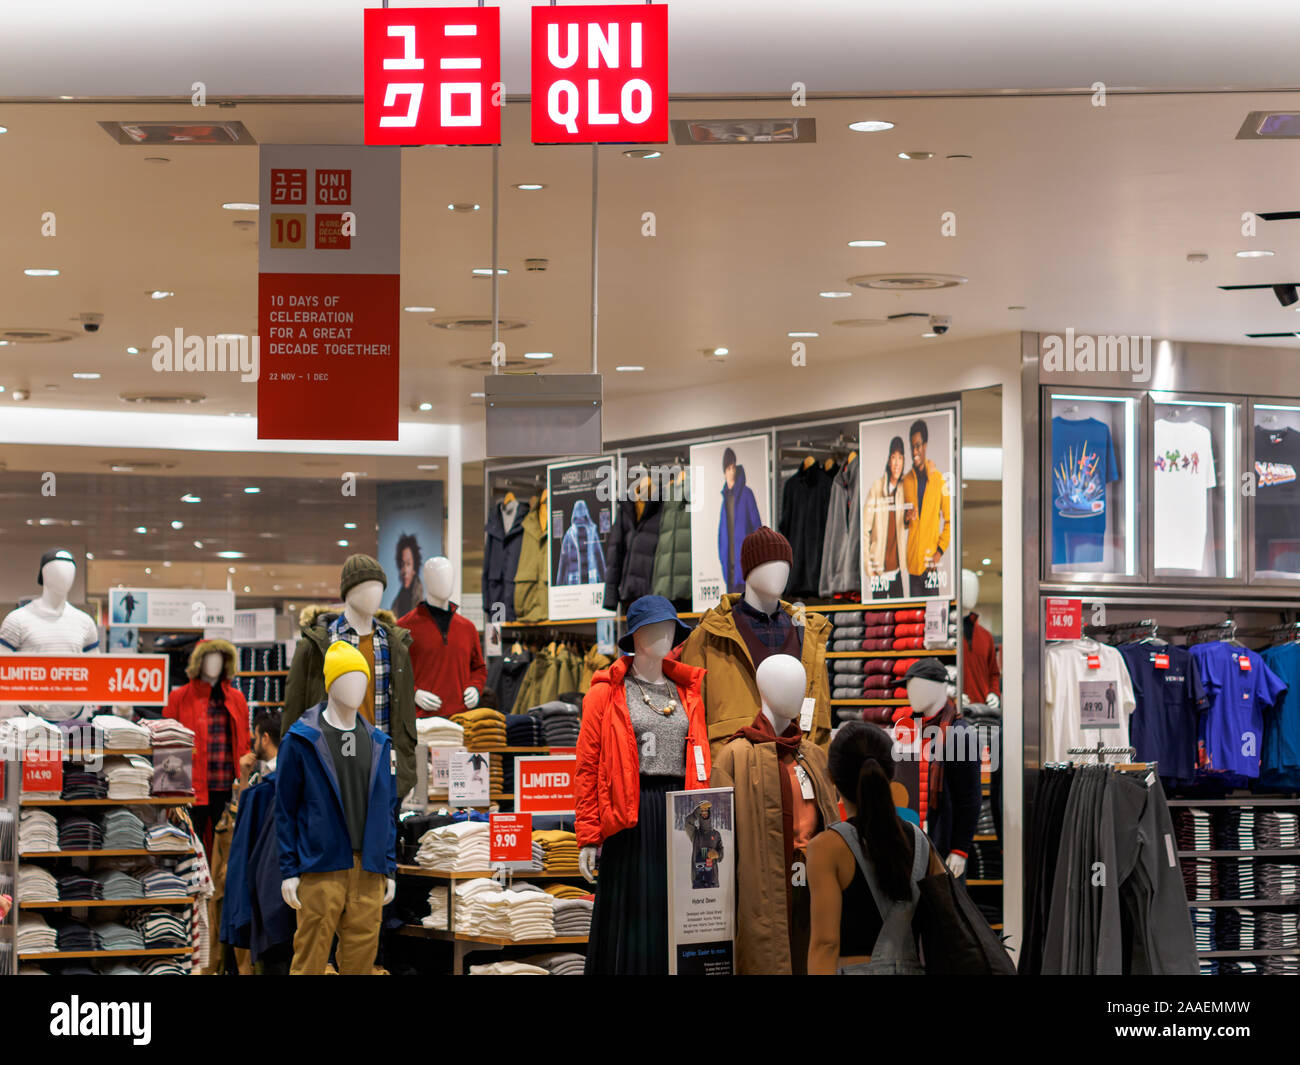 SINGAPORE - 6 MAY 2019 - Frontage of a Uniqlo clothing retail outlet at Jewel, Changi Airport, Singapore Stock Photo